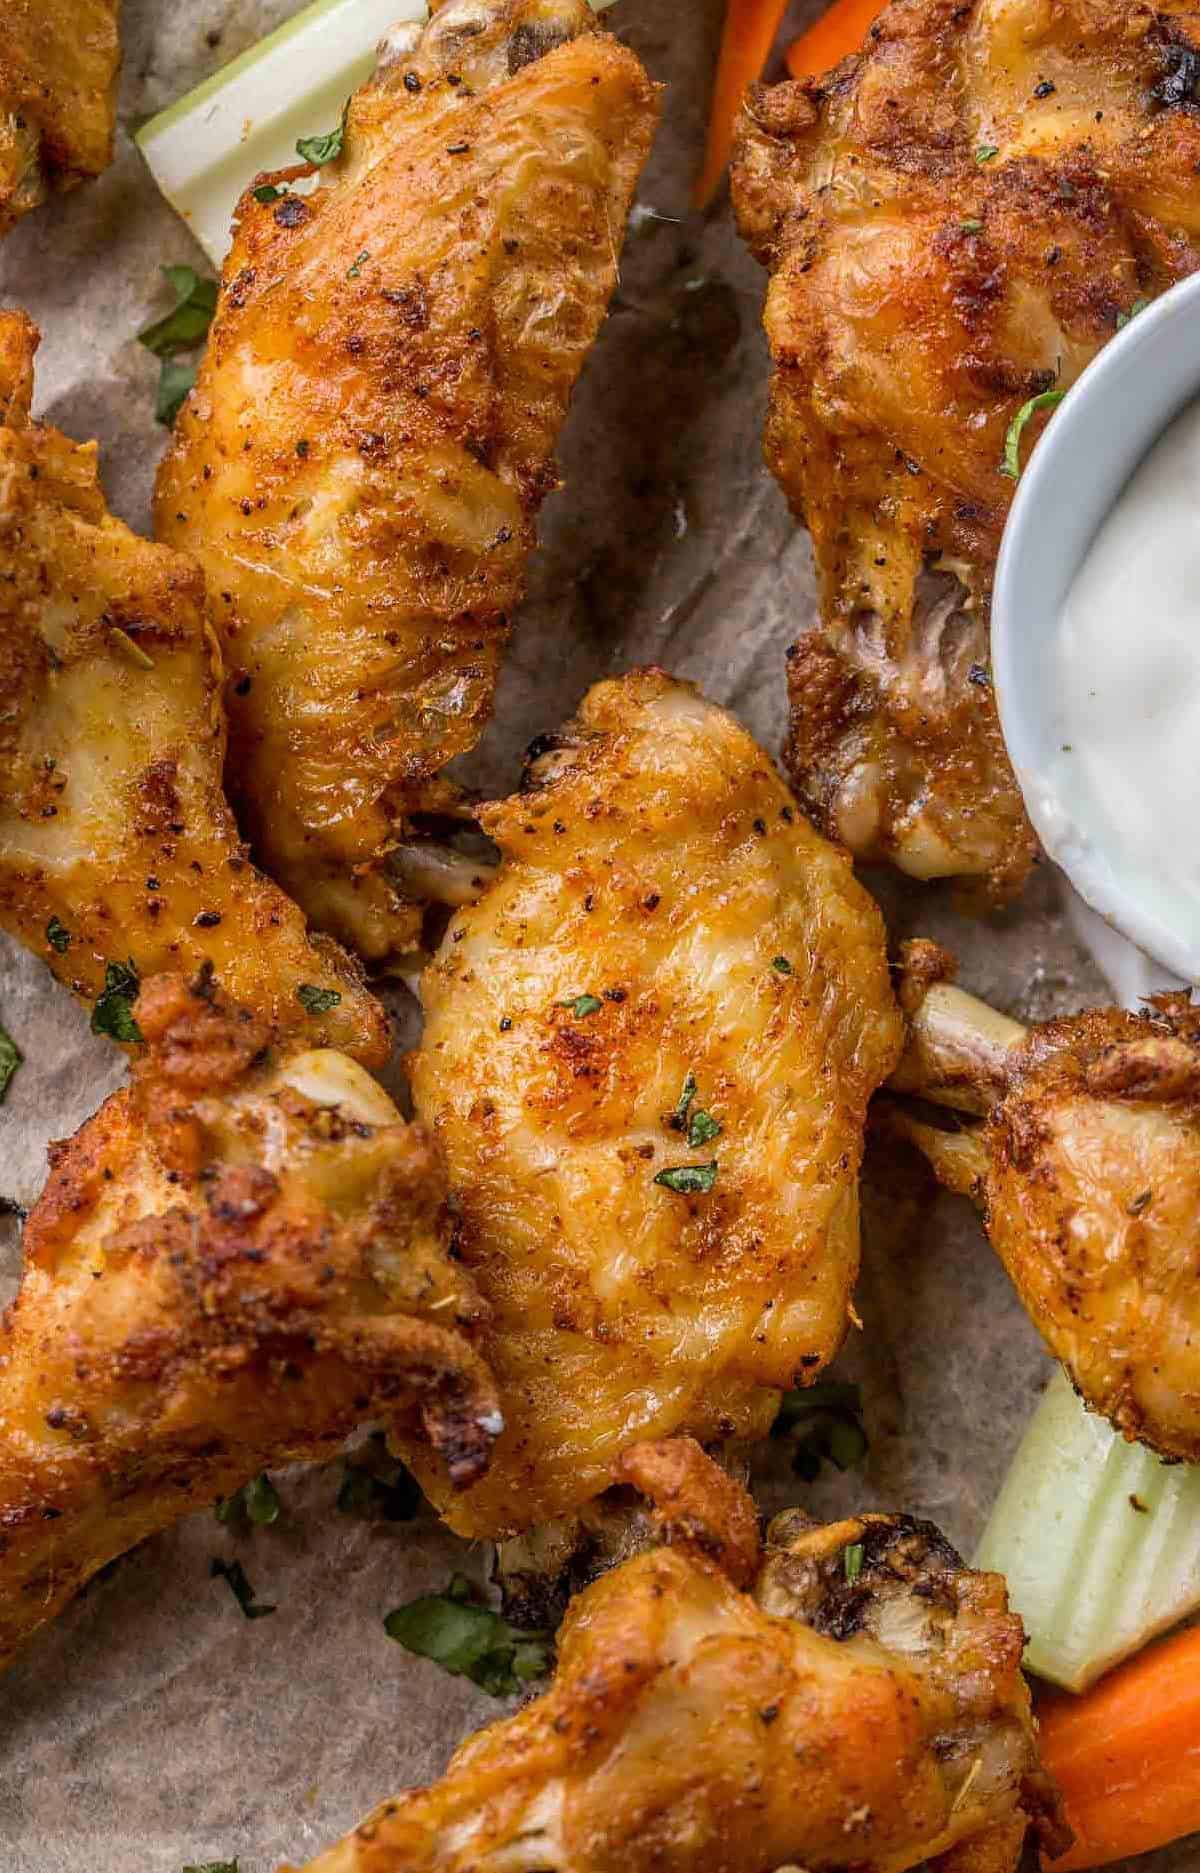  You'll be licking your fingers clean after enjoying these delectable wings.